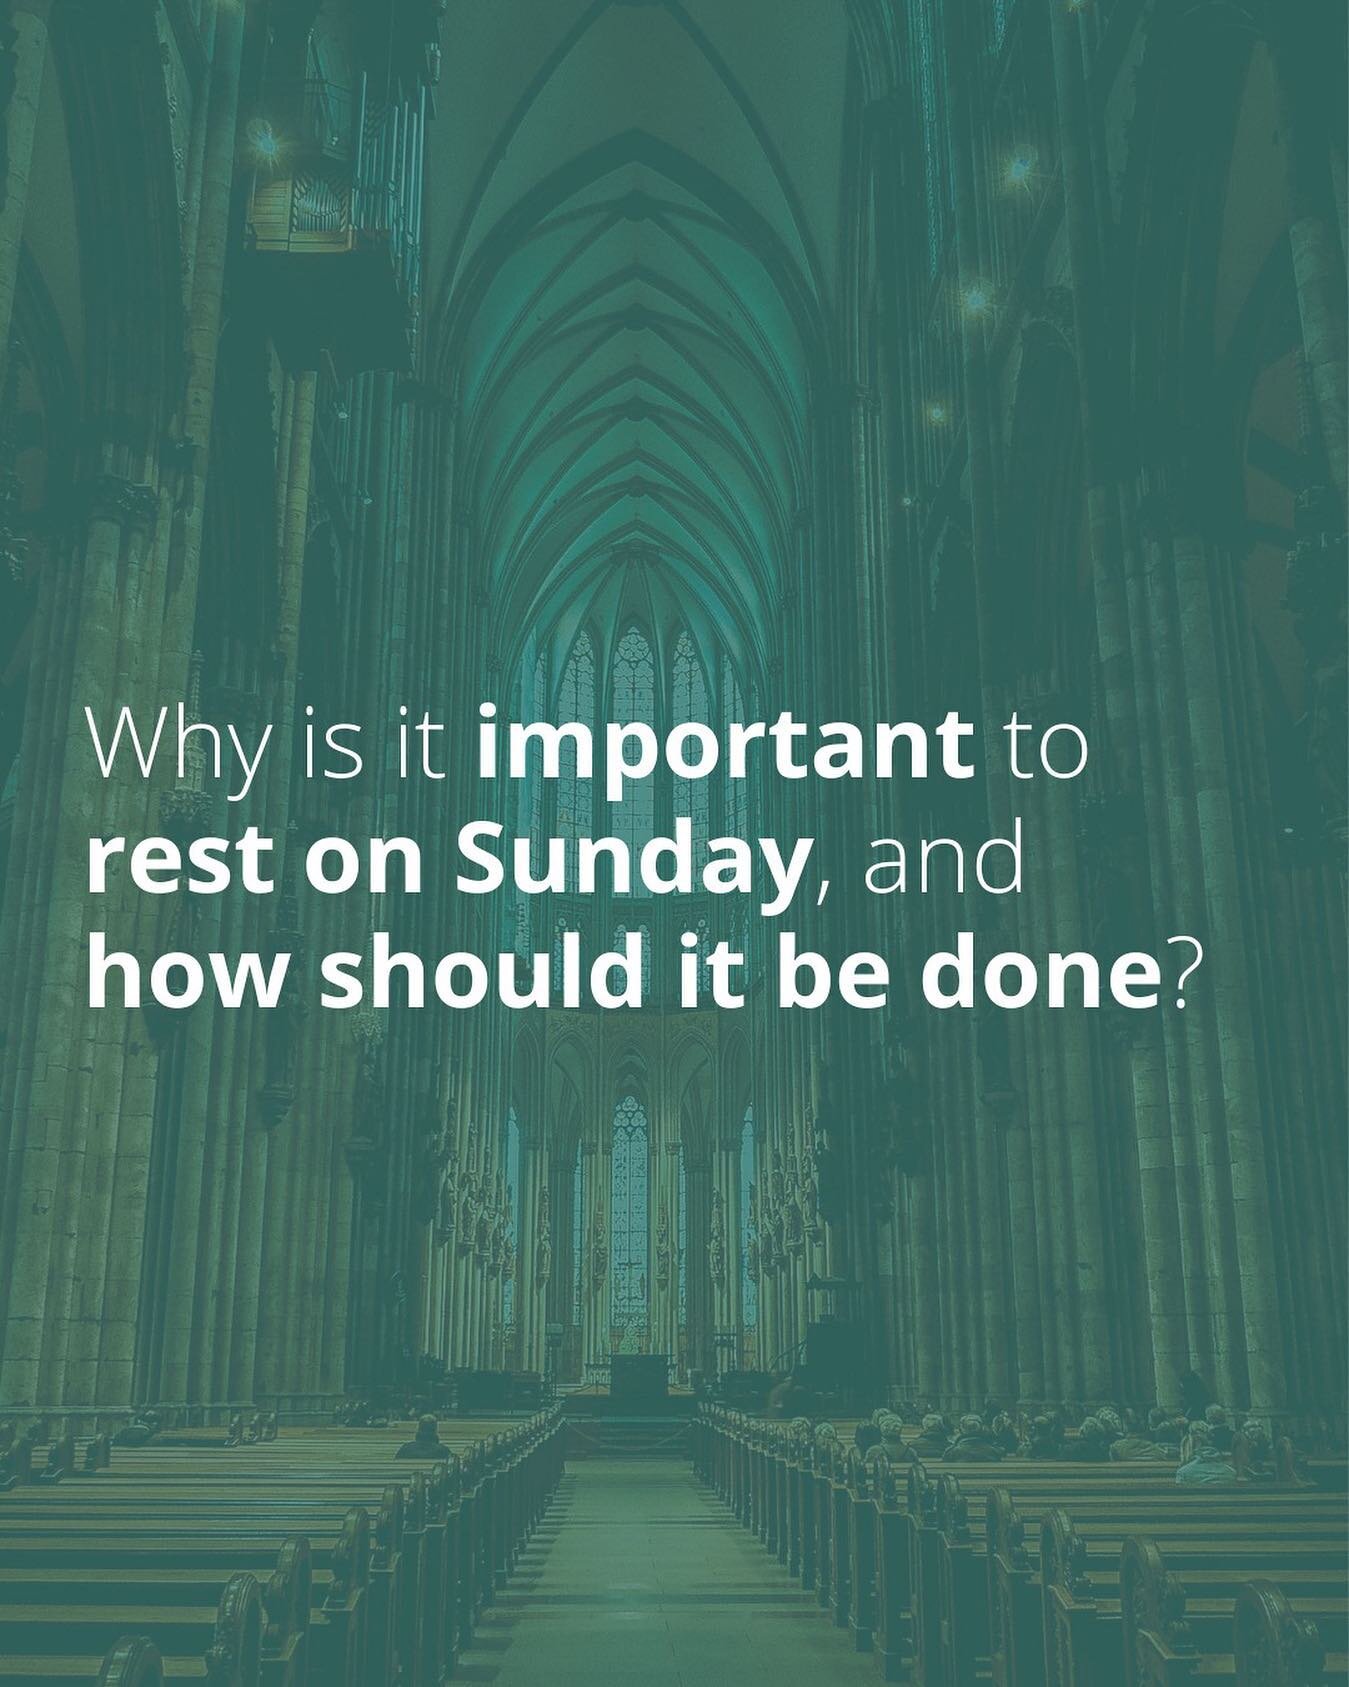 The Catholic Church encourages its members to view Sunday, also known as the Lord's Day, as a special day dedicated to worship and rest. The Catechism of the Catholic Church states that &quot;the Sunday Eucharist is the foundation and confirmation of